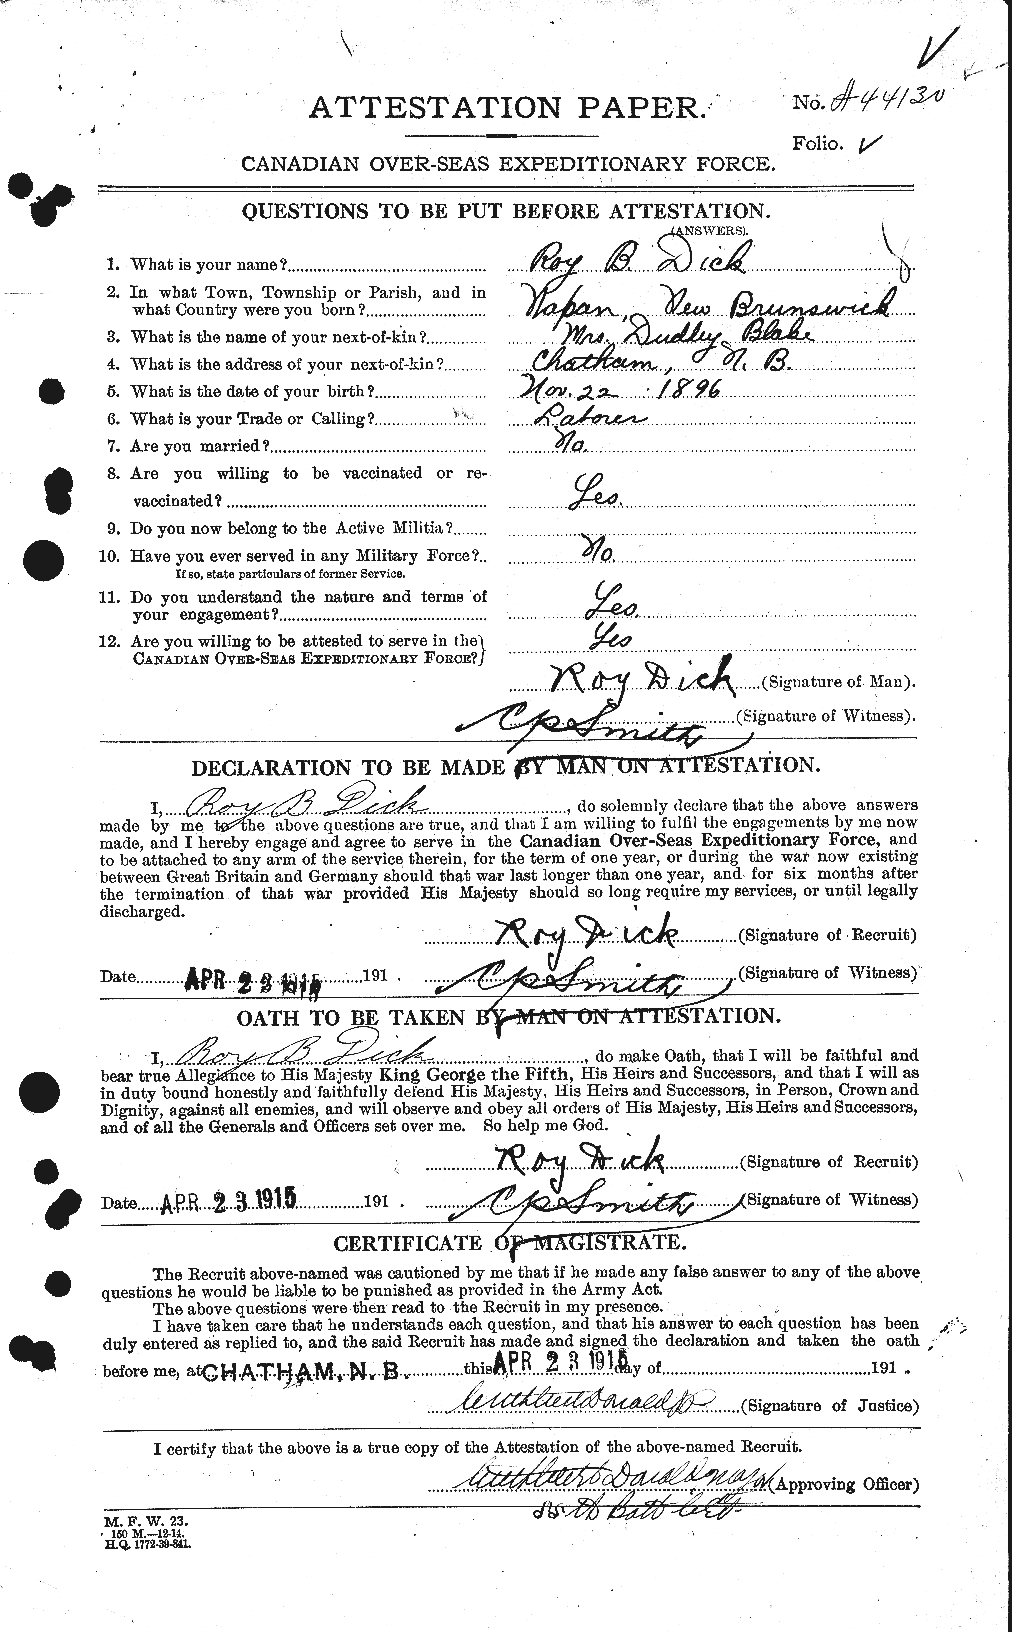 Personnel Records of the First World War - CEF 290555a